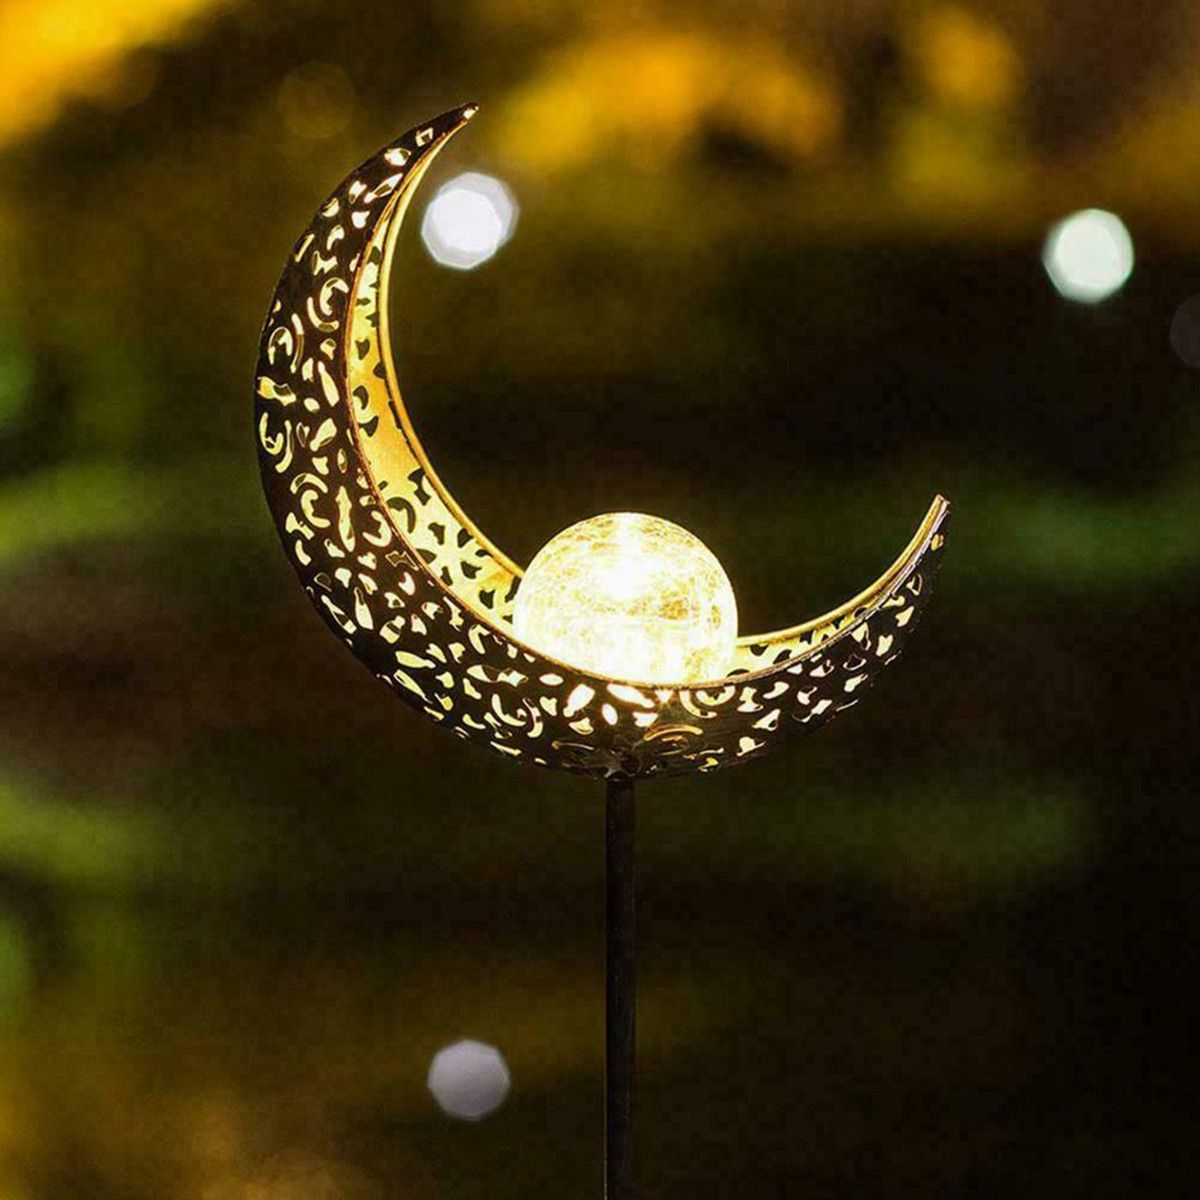 LED-Garden-Solar-Lights-Pathway-Outdoor-Moon-Decor-Crackle-Lawn-Lamp-Glass-1685489